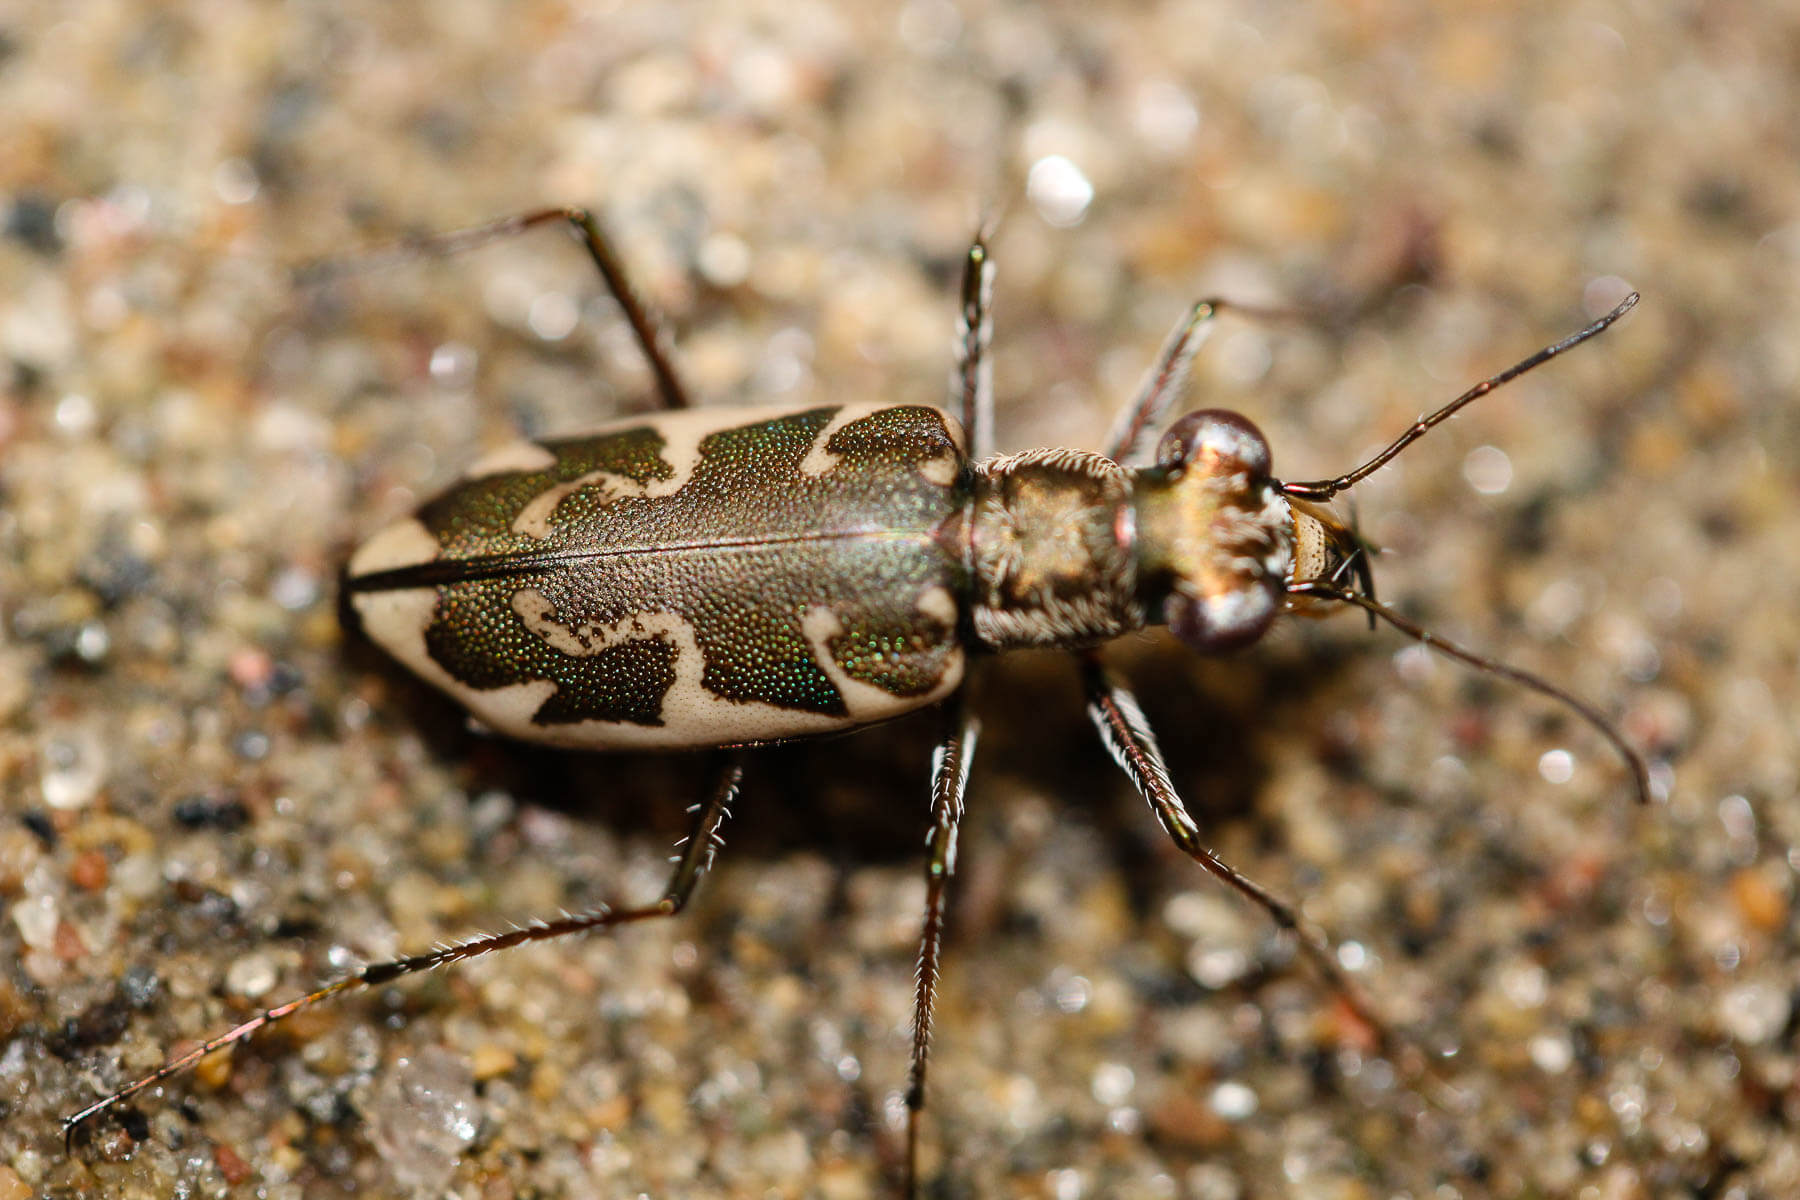 The Puritan tiger beetle is tan with a dark-green design on its back.